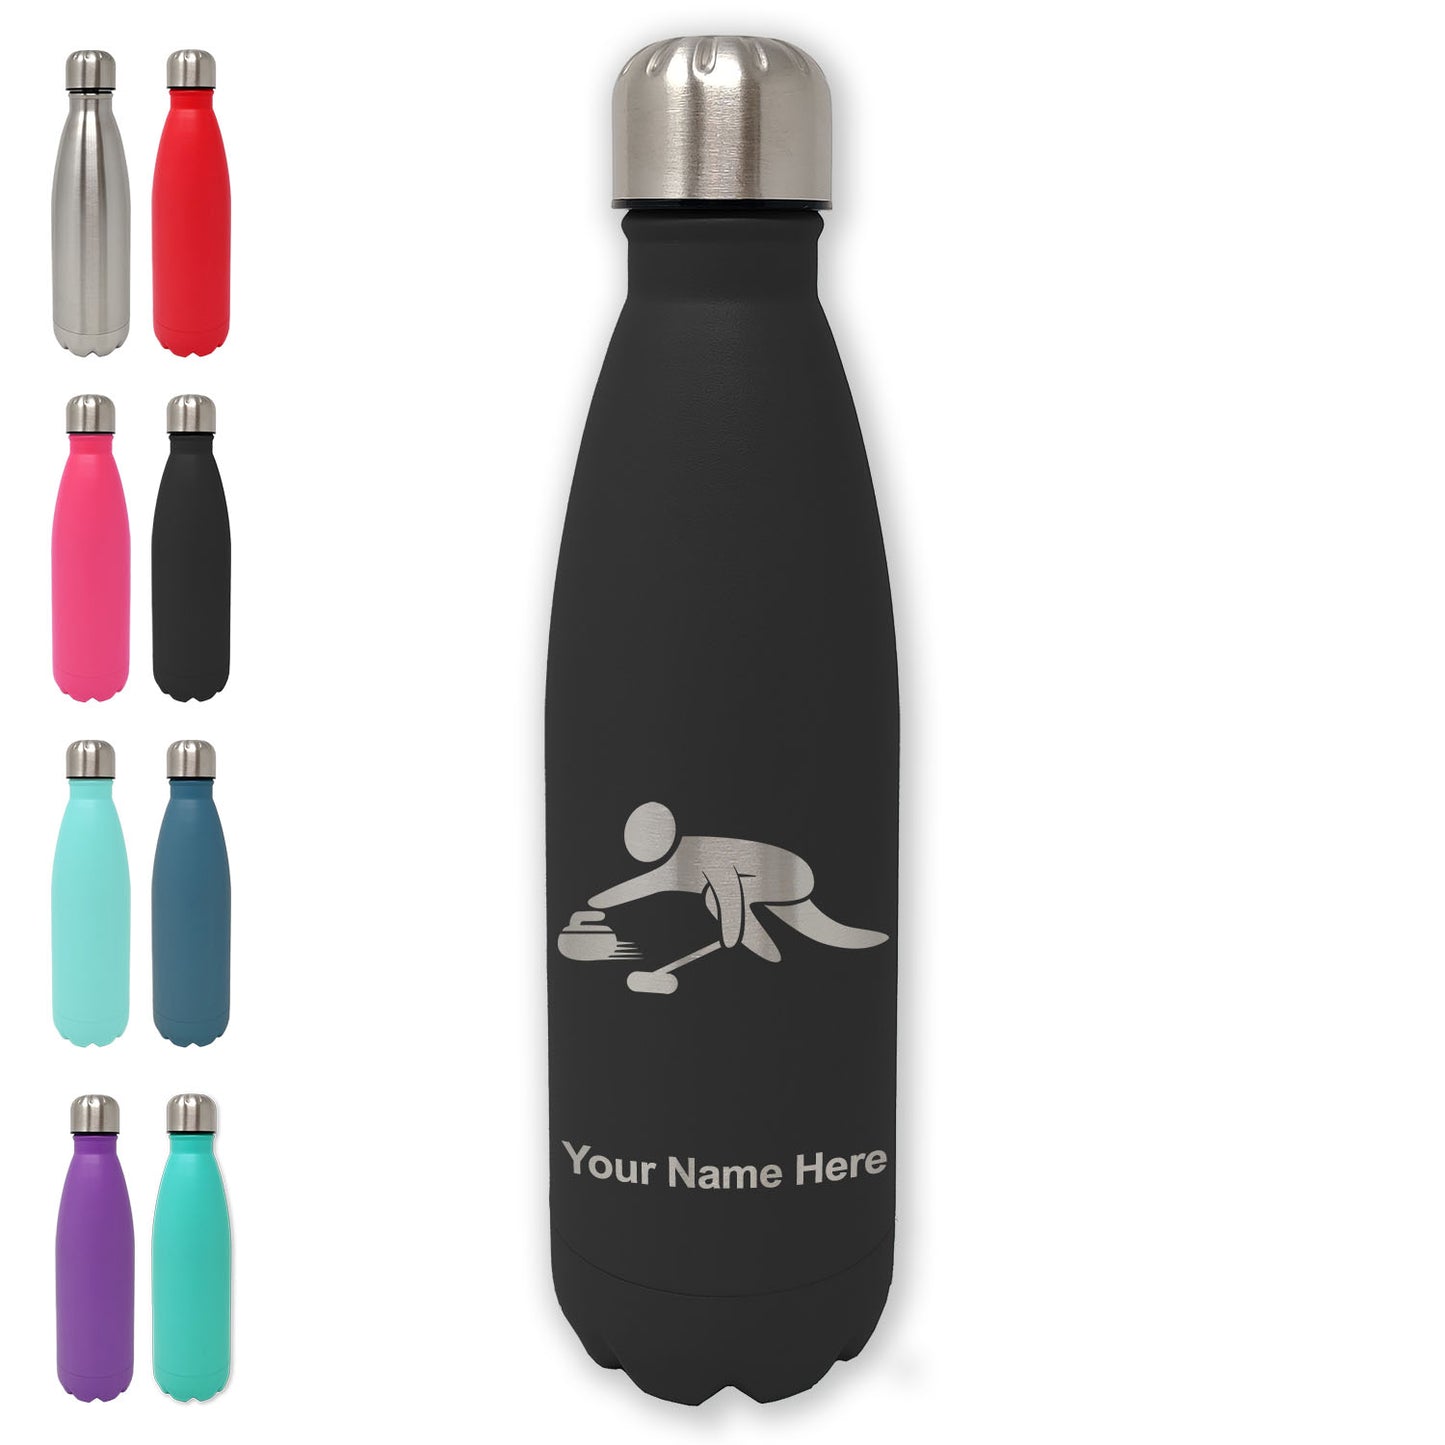 LaserGram Double Wall Water Bottle, Curling Figure, Personalized Engraving Included